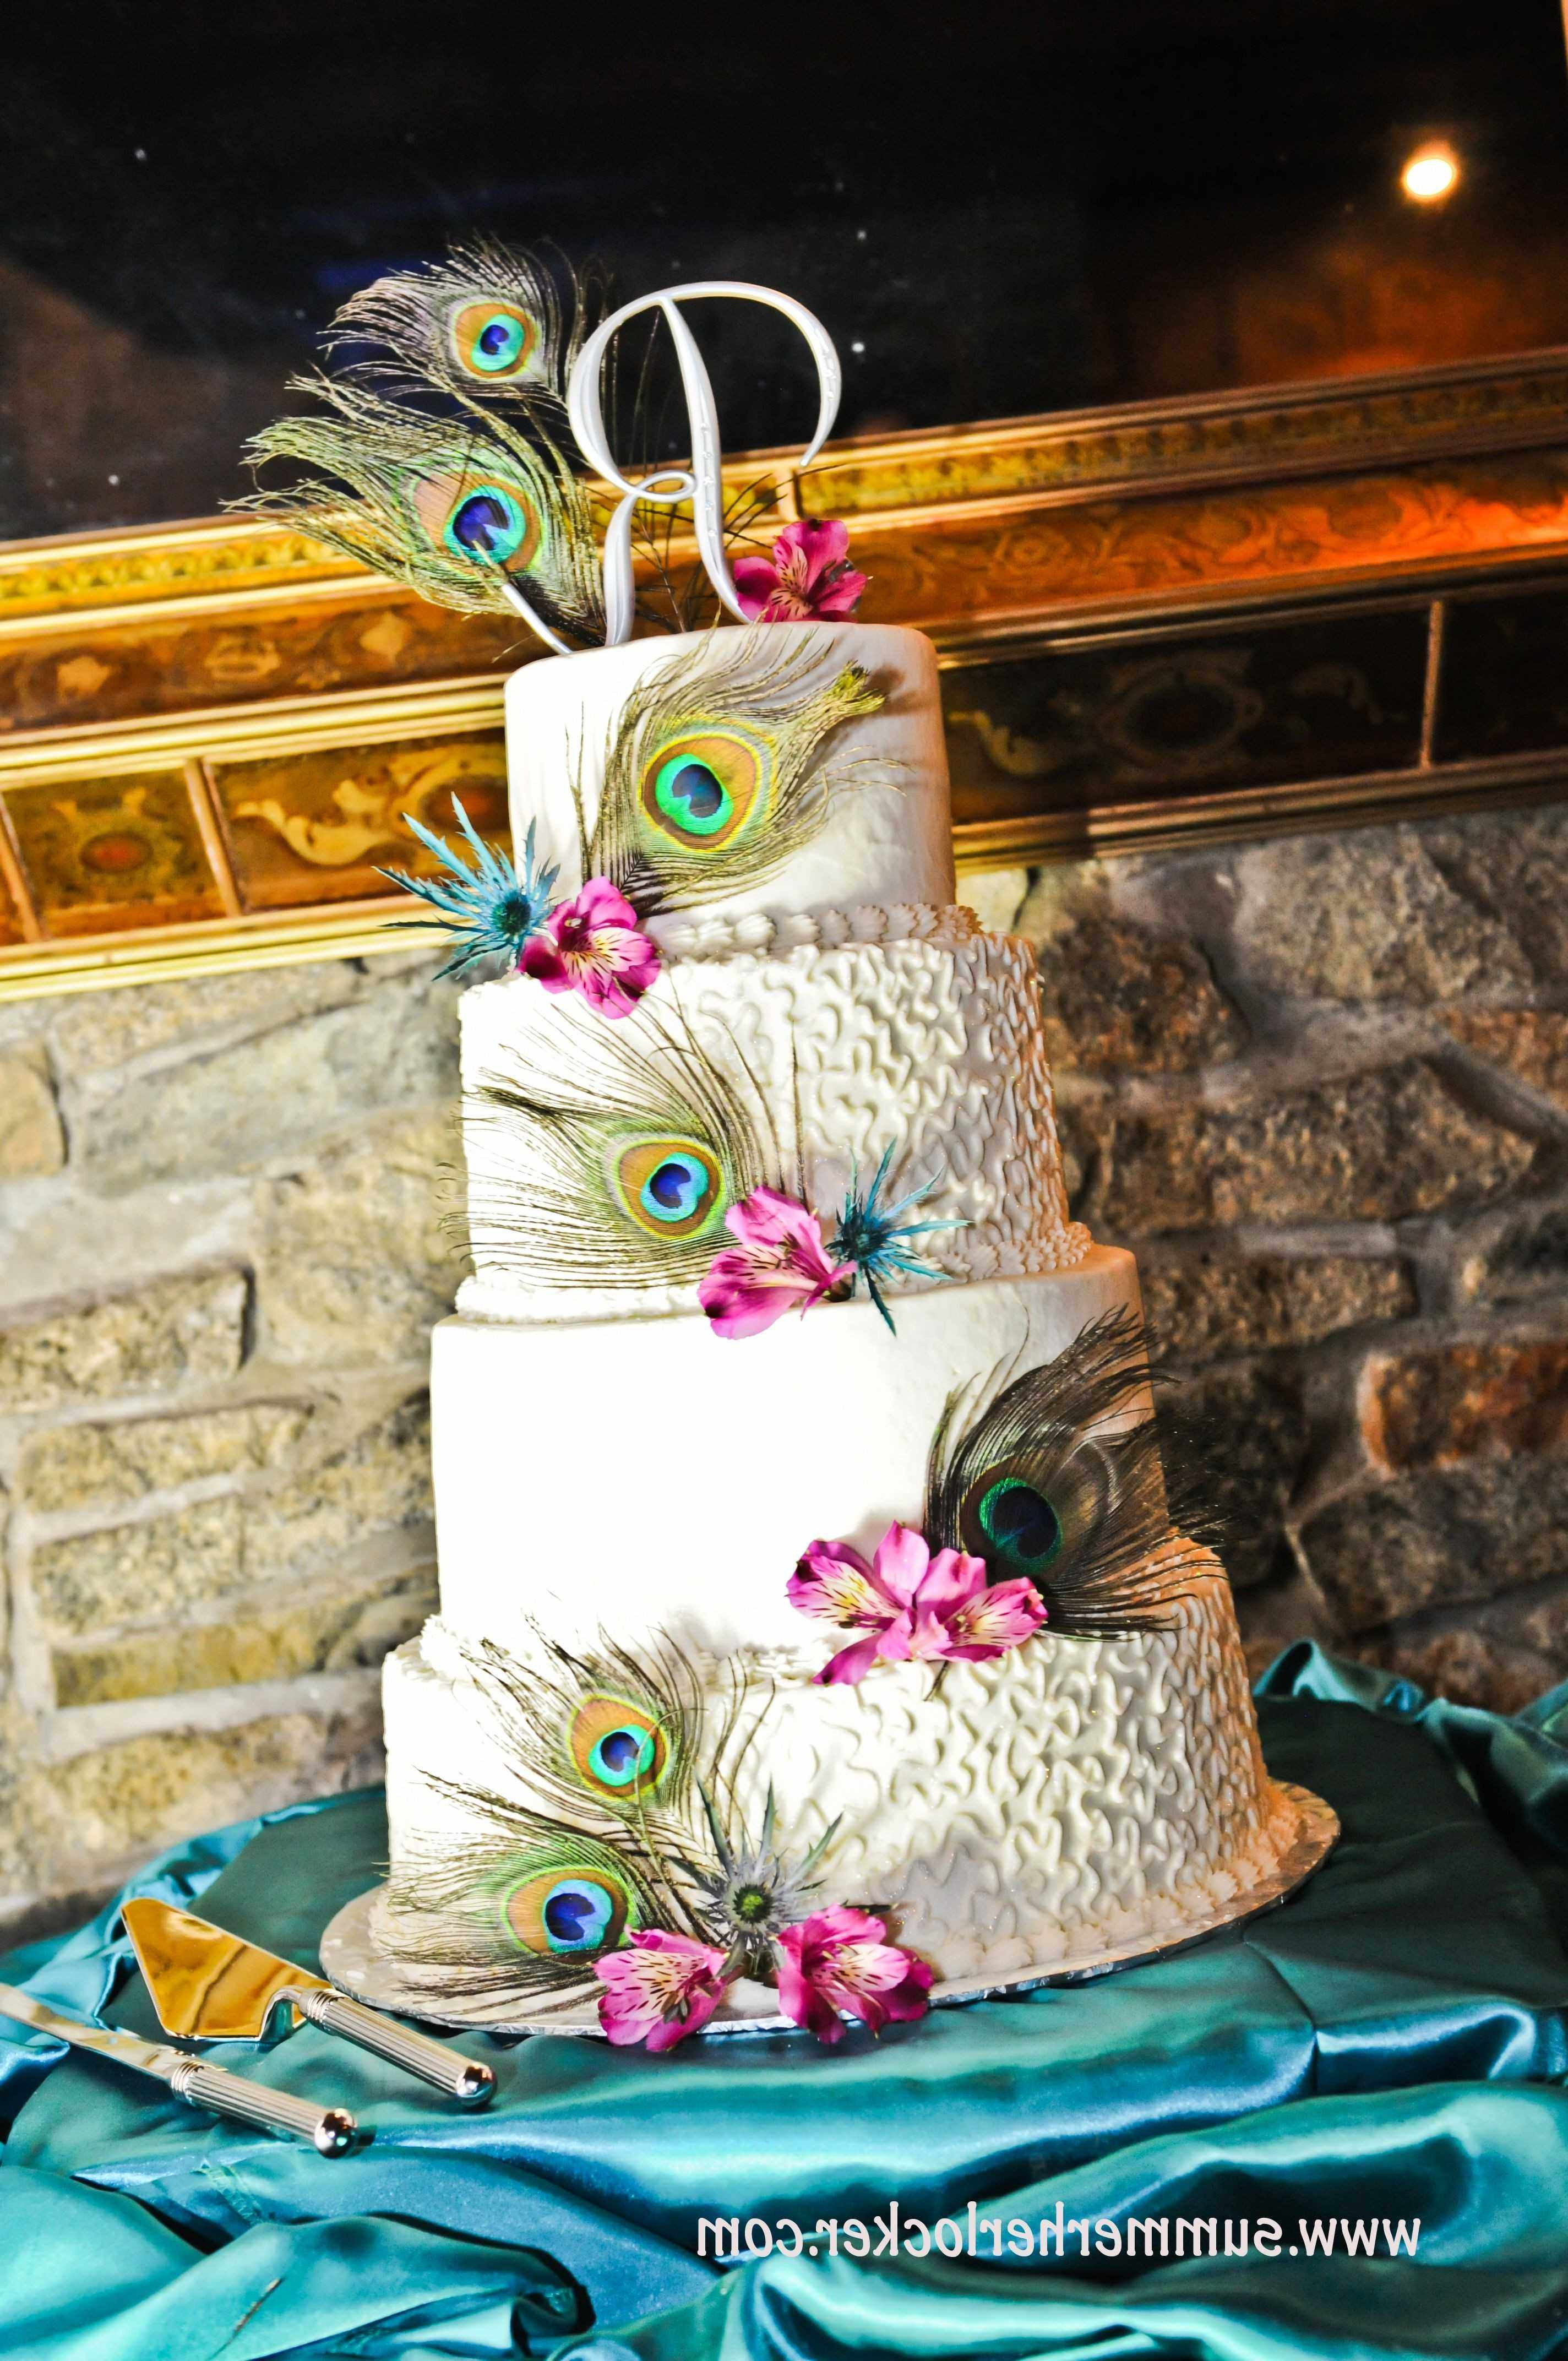 17 Recommended Peacock Feathers In Vase Ideas 2024 free download peacock feathers in vase ideas of peacock wedding ideas unique wedding cake peacock feathers my work throughout peacock wedding ideas unique wedding cake peacock feathers my work pinterest